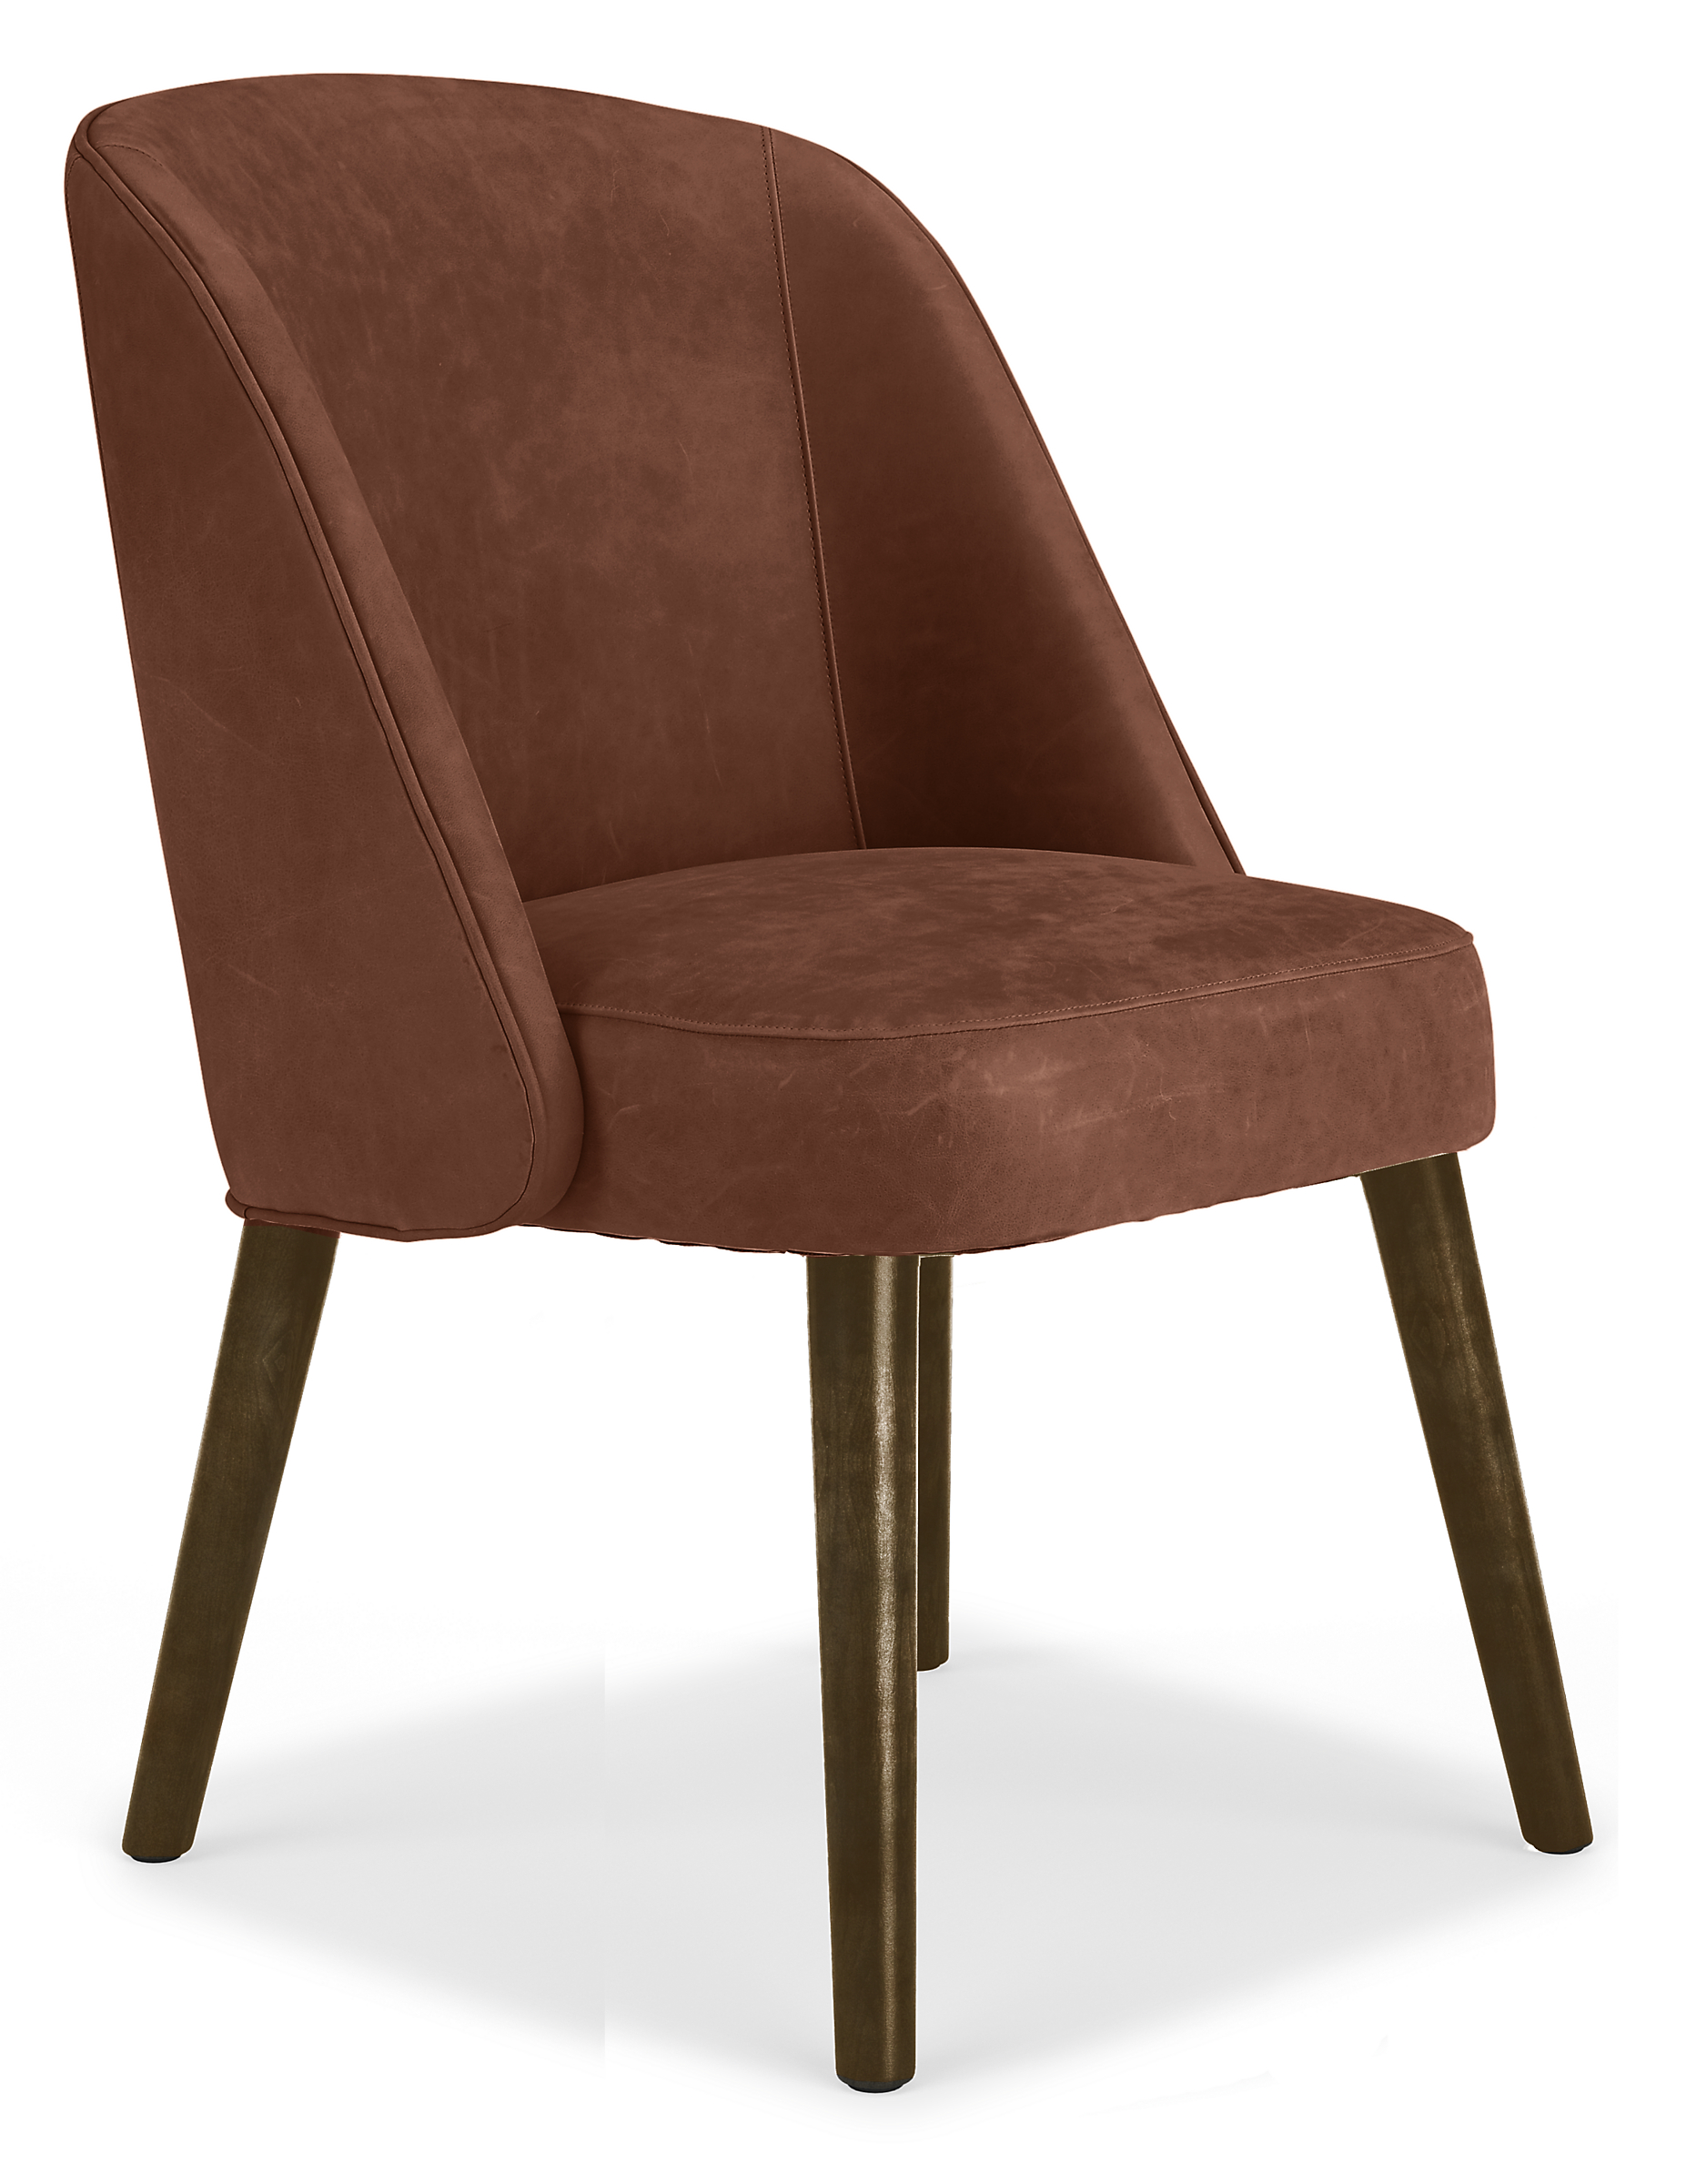 Cora Chair in Lecco Cognac Leather with Charcoal Legs